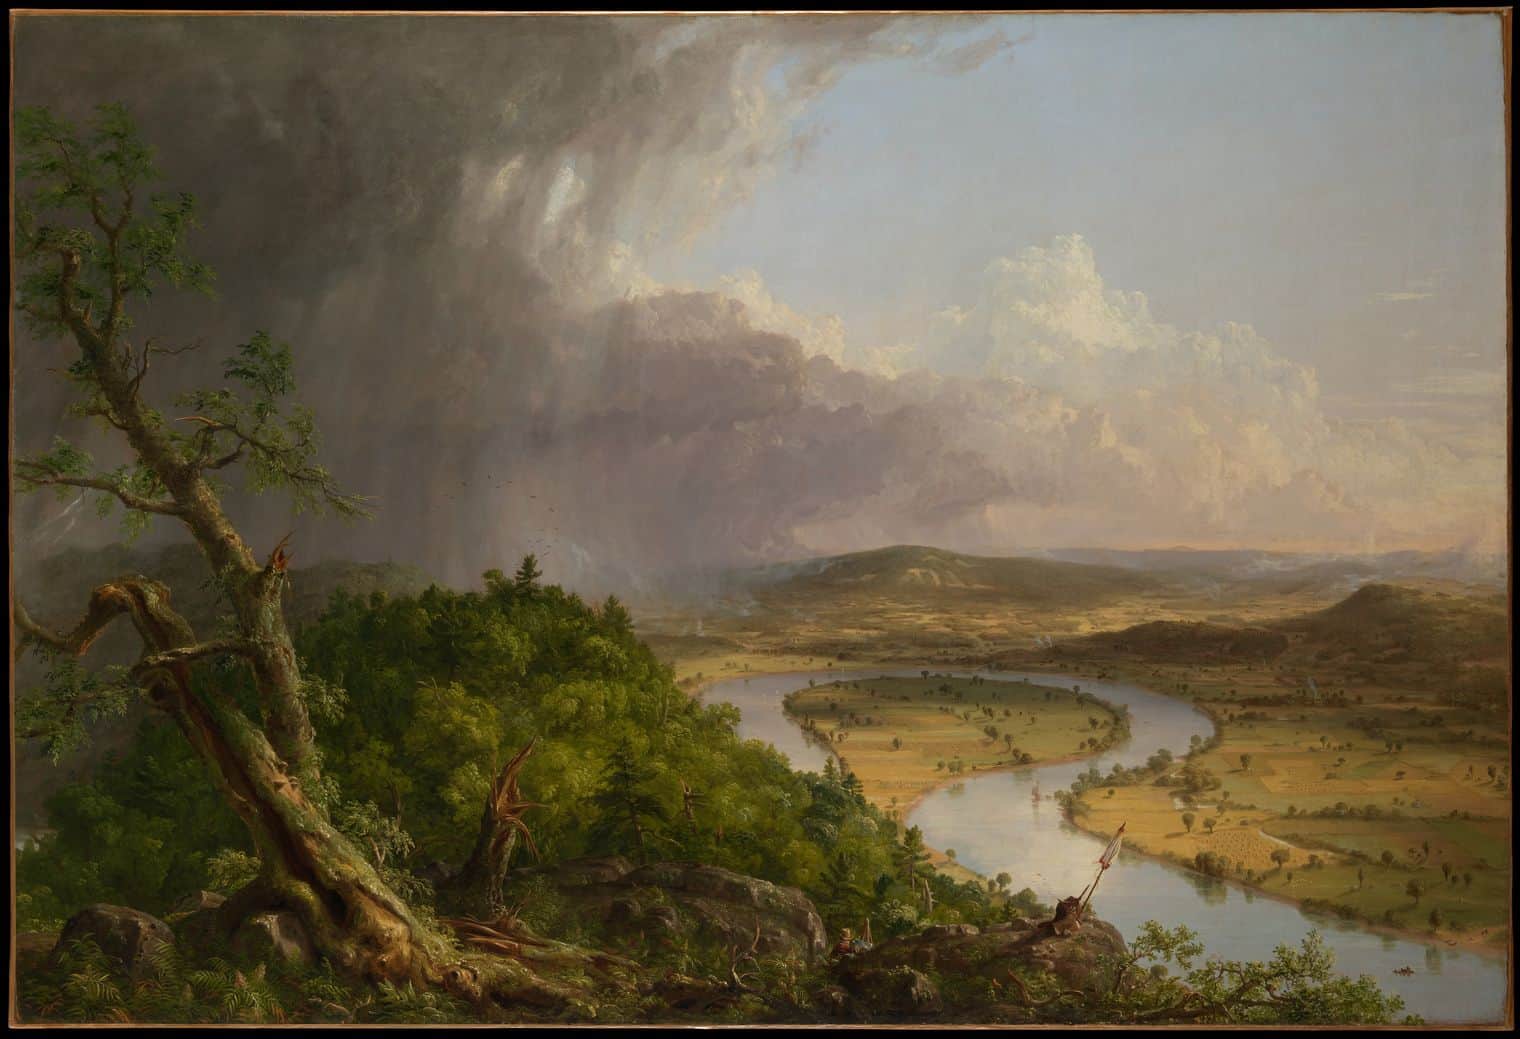 View from Mount Holyoke, Northampton, Massachusetts, after a Thunderstorm—The Oxbow, 1836, Thomas Cole, The Metropolitan Museum of Art (article on life review therapy)